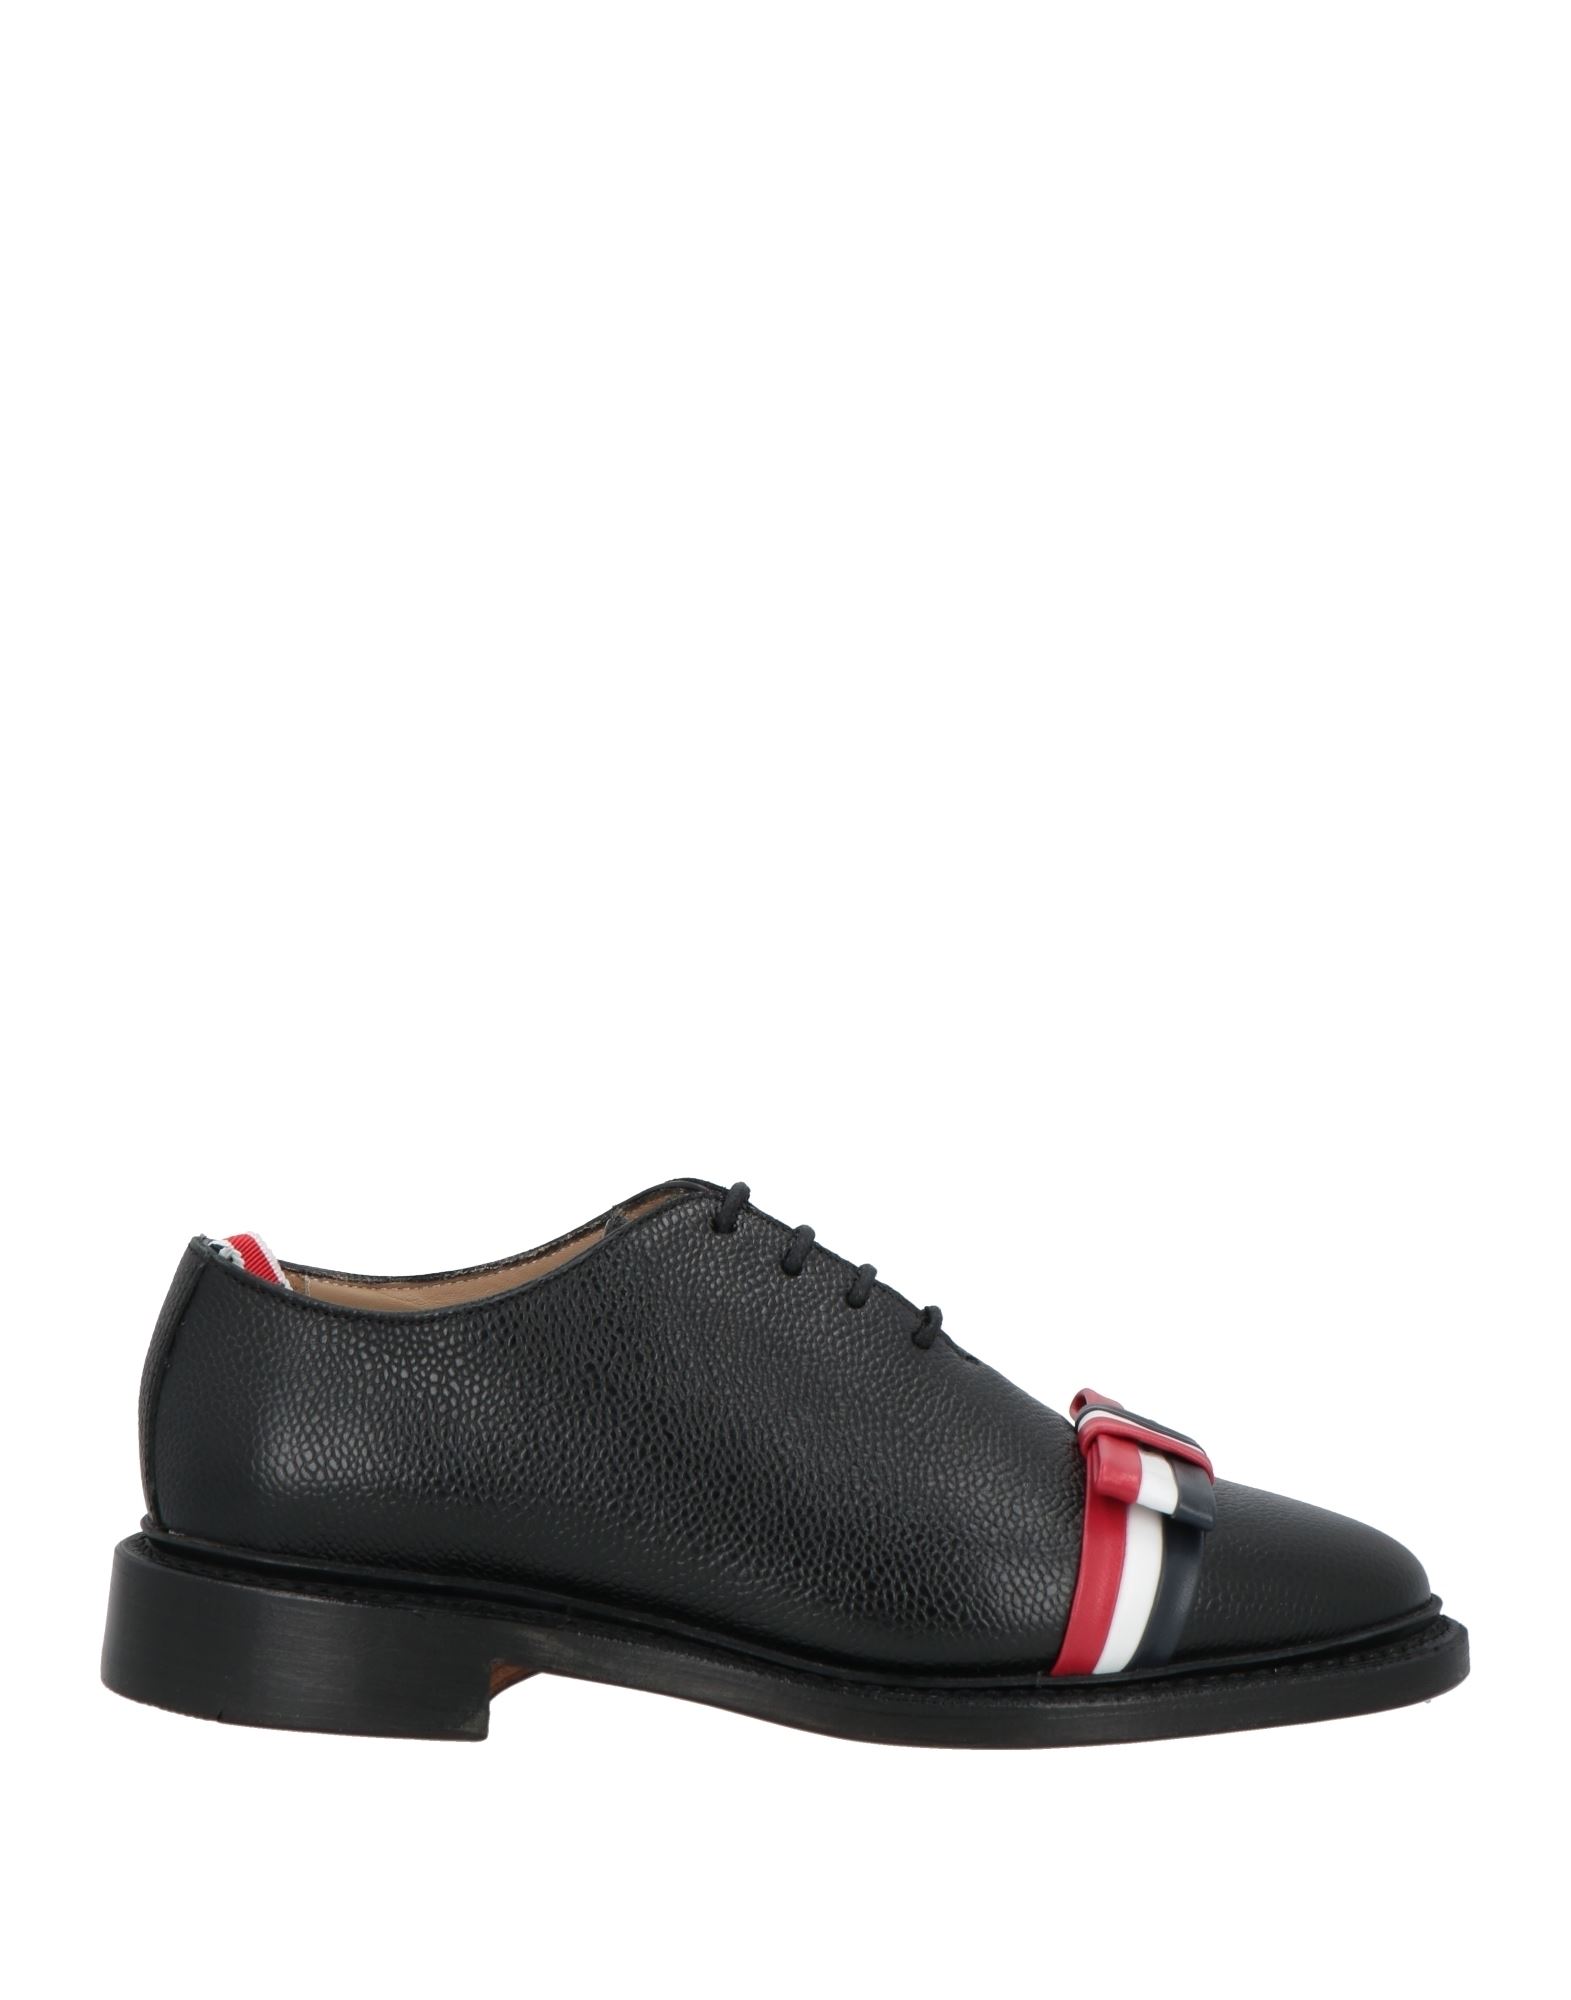 THOM BROWNE THOM BROWNE WOMAN LACE-UP SHOES BLACK SIZE 6 SOFT LEATHER,11256260XB 13